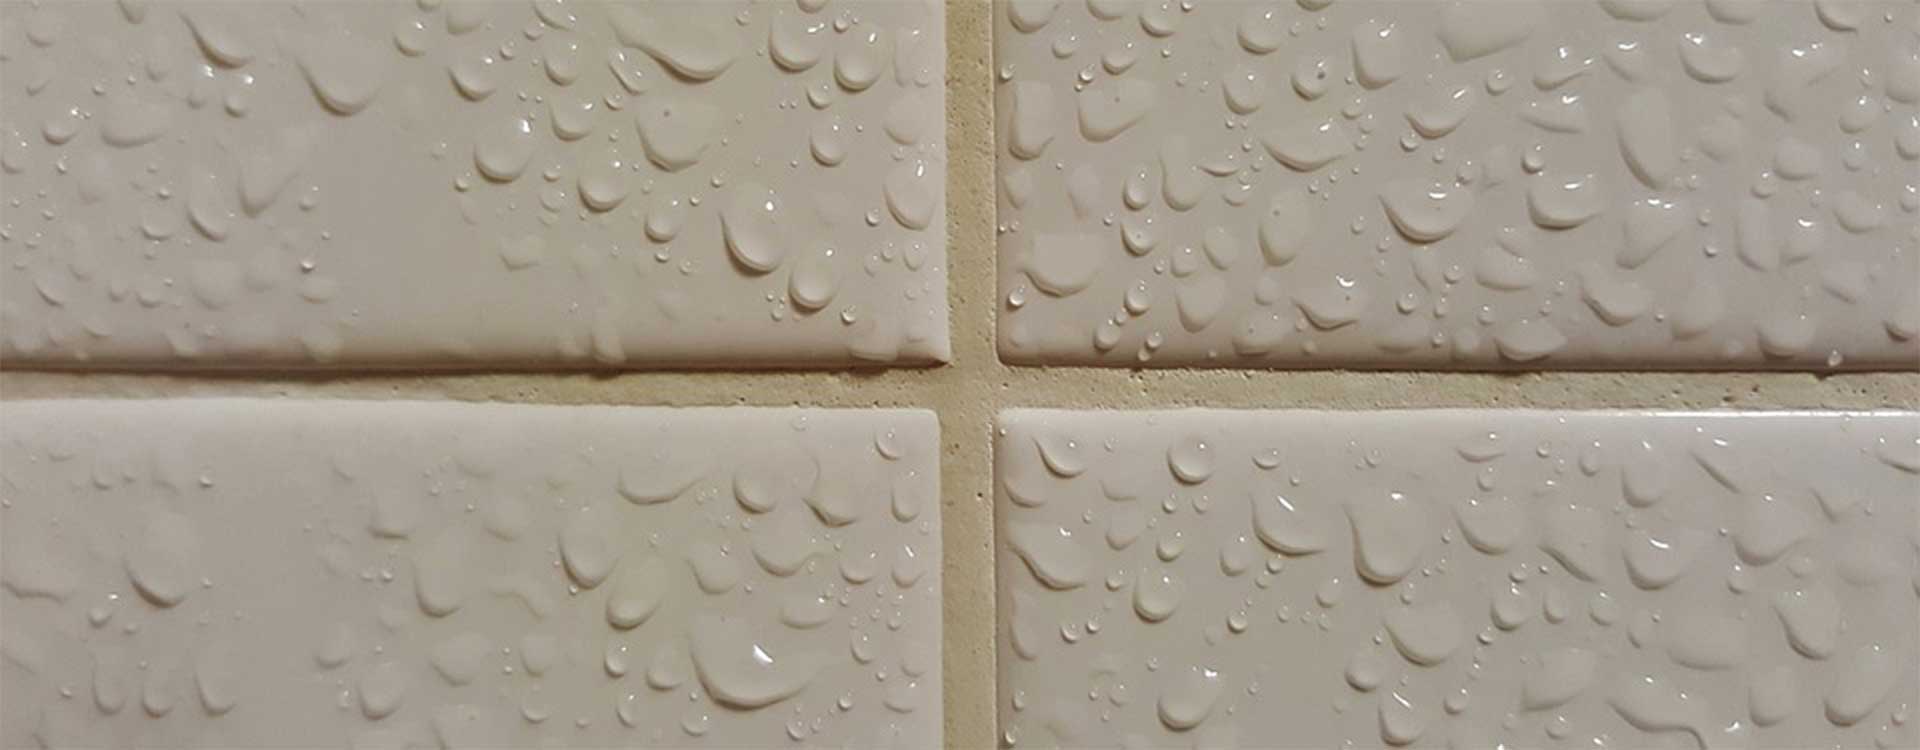 how to seal cracked grout in a shower